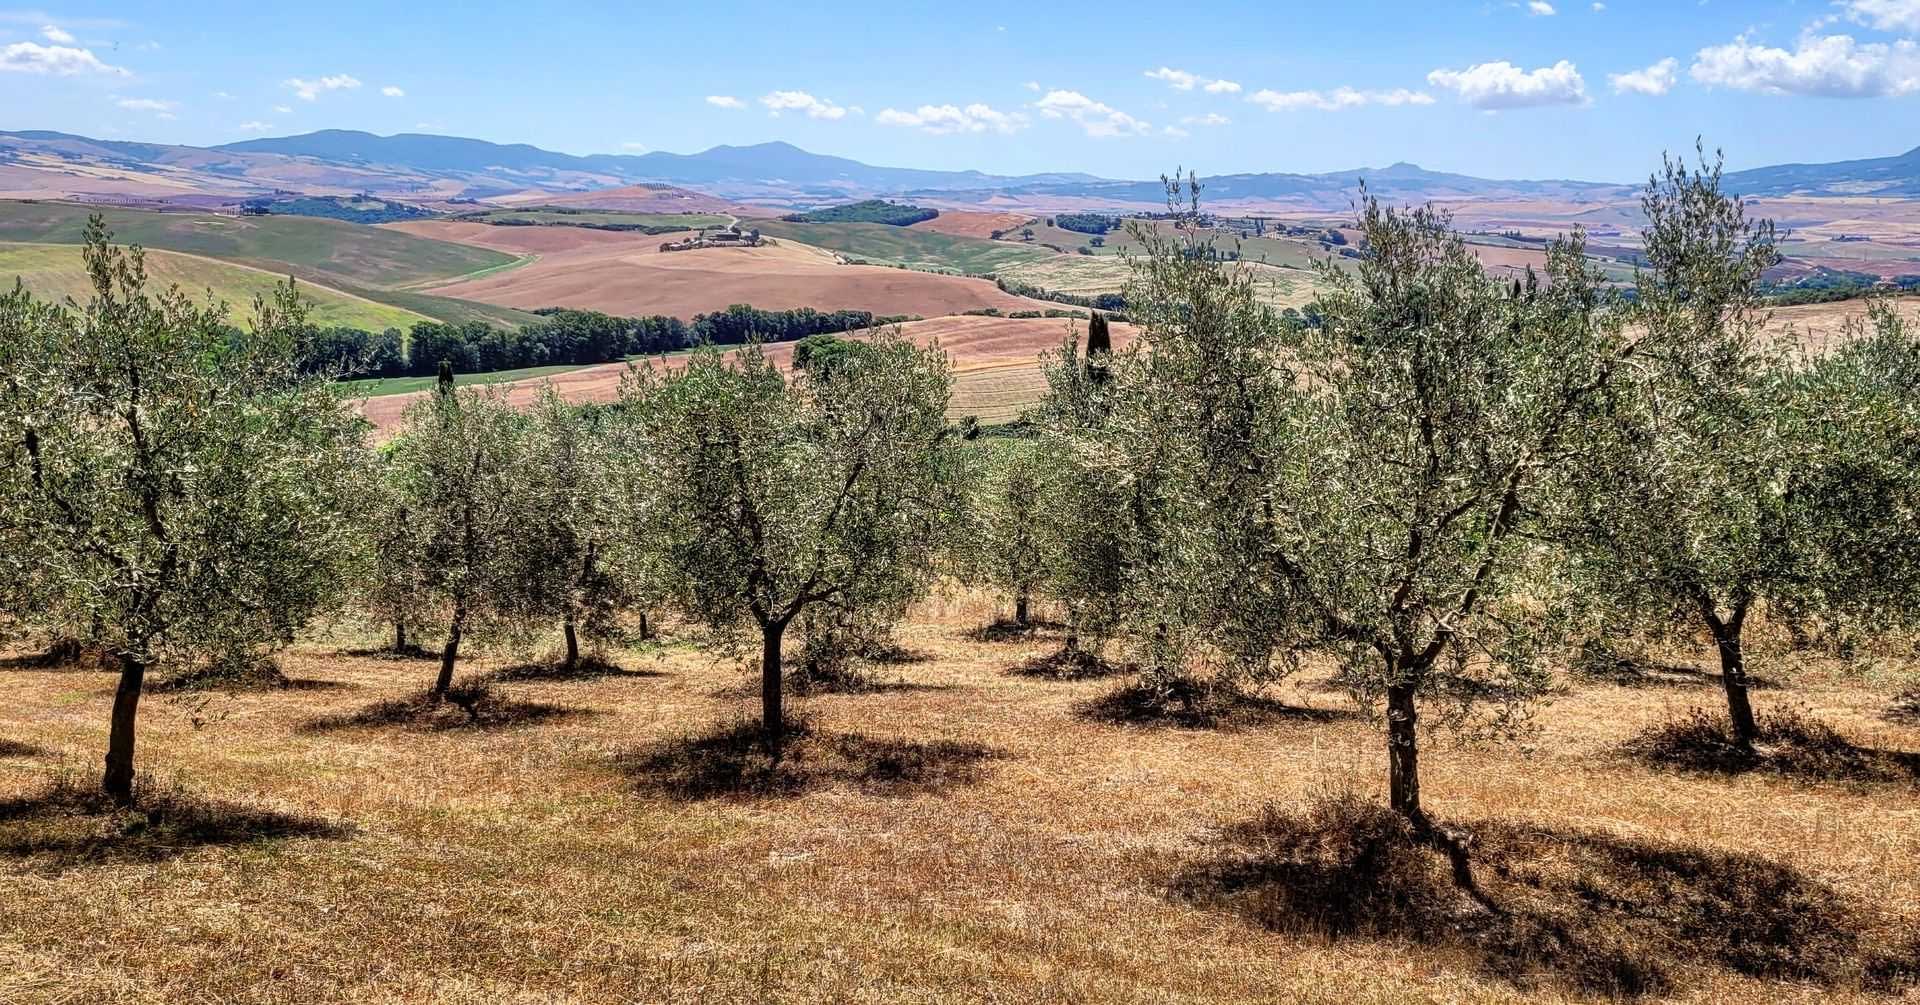 production-business-europe-in-tuscany-farmers-cope-with-climate-challenges-while-striving-for-top-quality-olive-oil-times